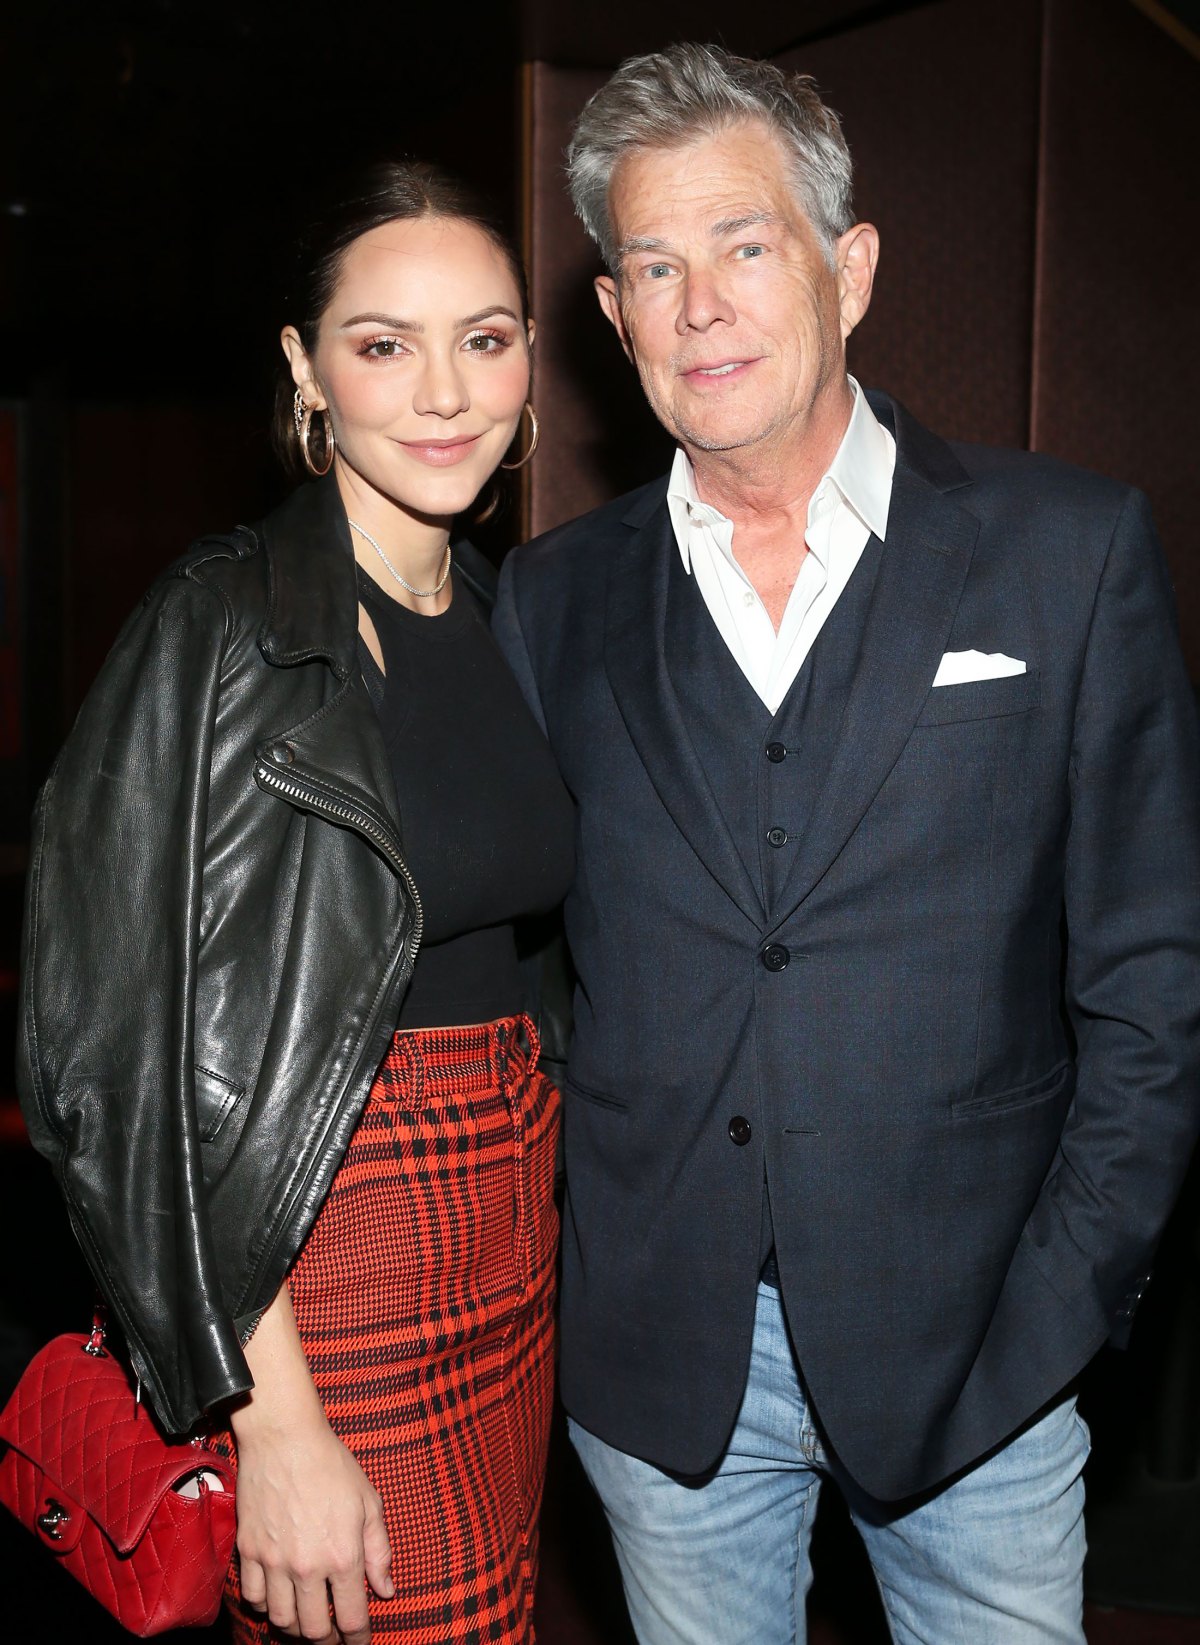 Katharine McPhee and David Foster Their Relationship Timeline